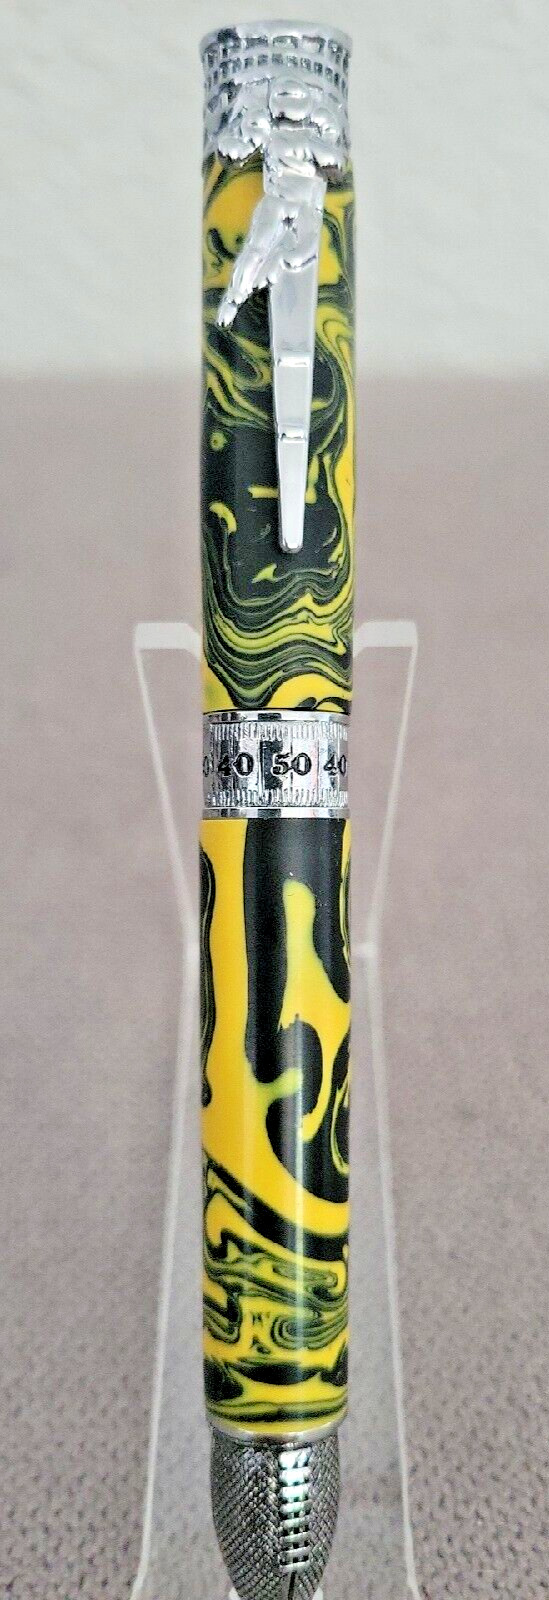 Pittsburgh Steelers Hand Turned Acrylic Football Ballpoint Pen, Black and Gold